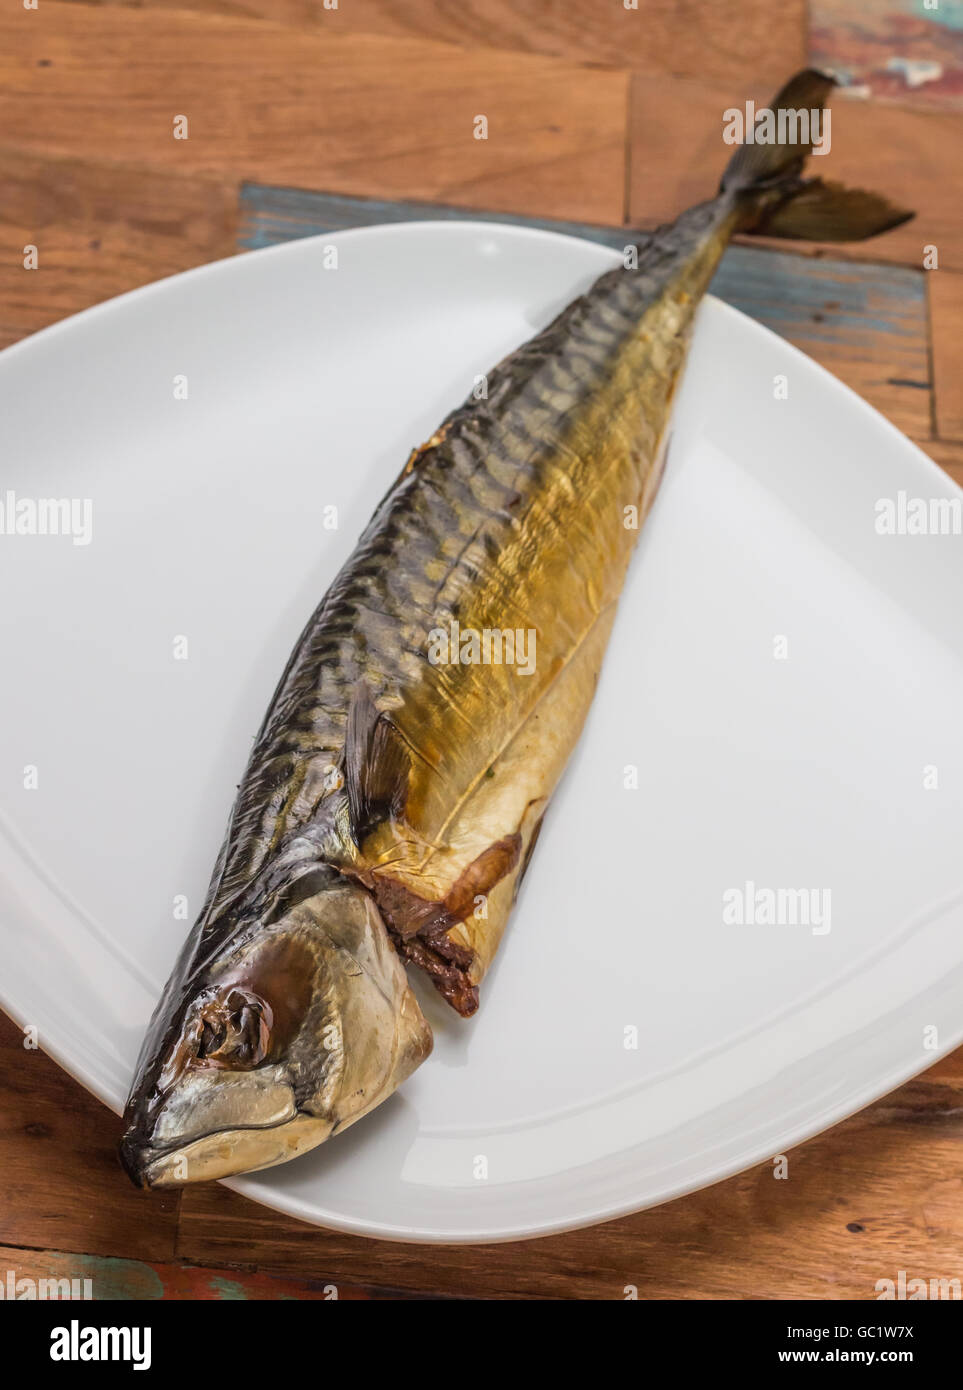 Eating Mackerel High Resolution Stock Photography and Images - Alamy